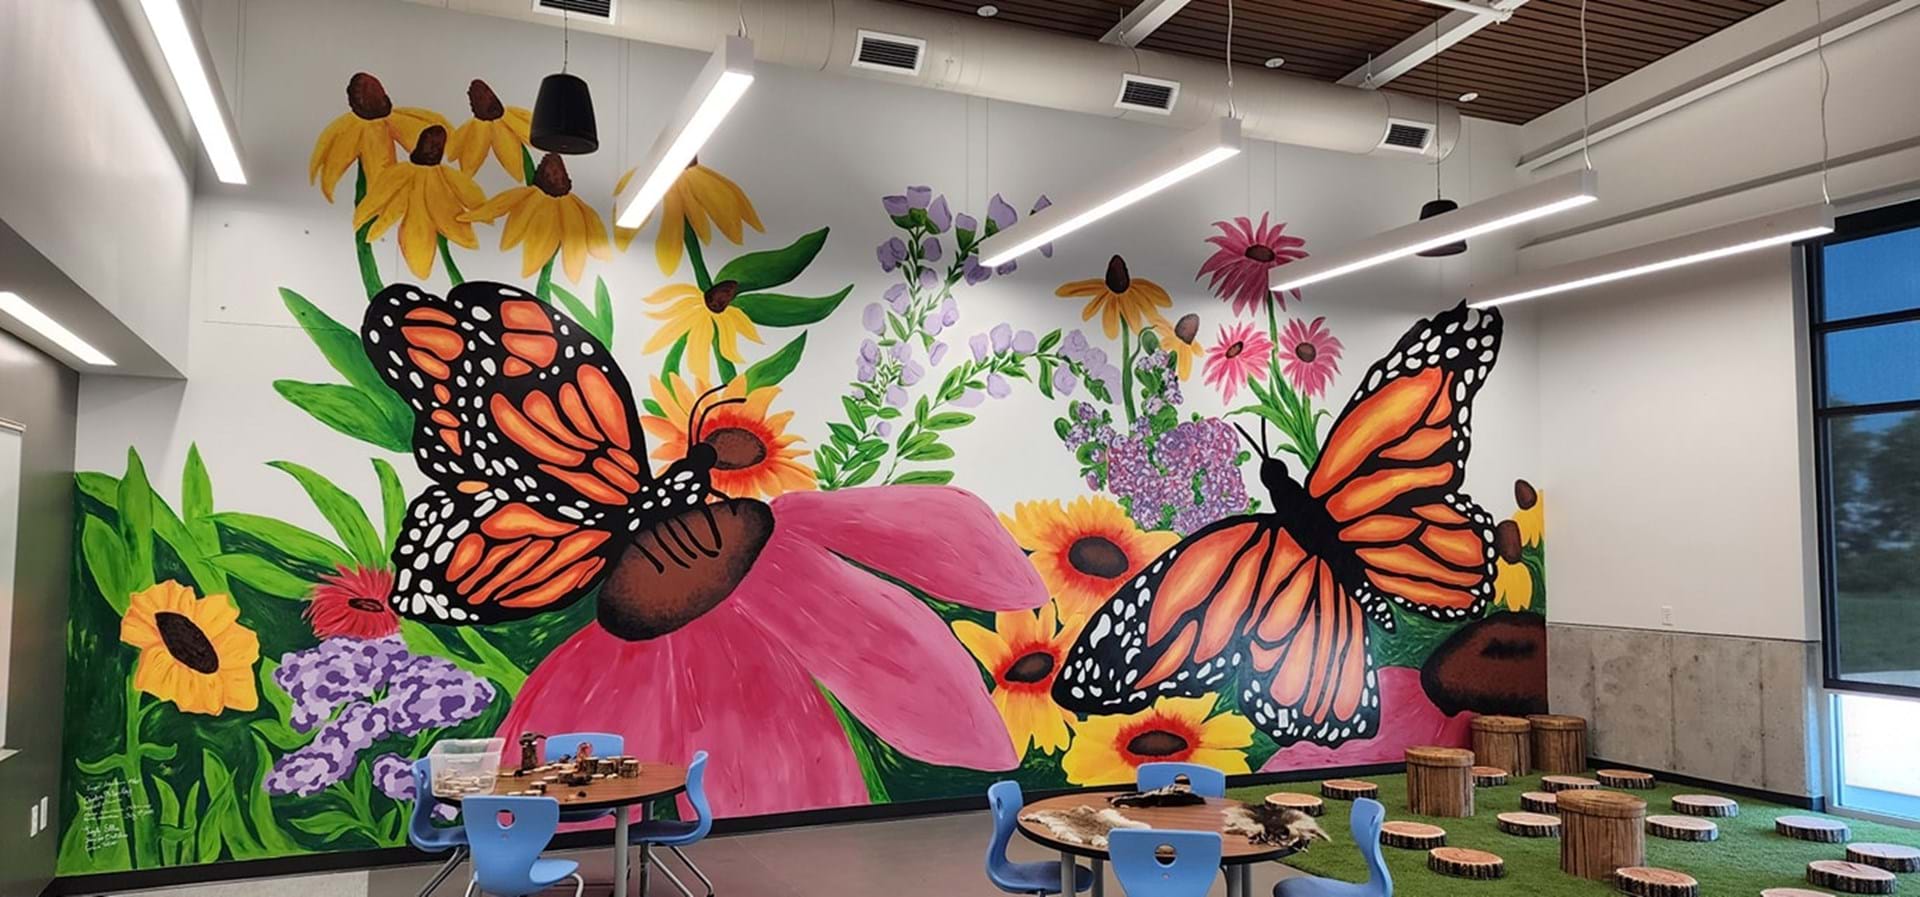 This mural, featuring indigenous Iowan prairie flowers and monarch butterflies, was painted by Fort Dodge Senior High and Iowa Central Community College students.